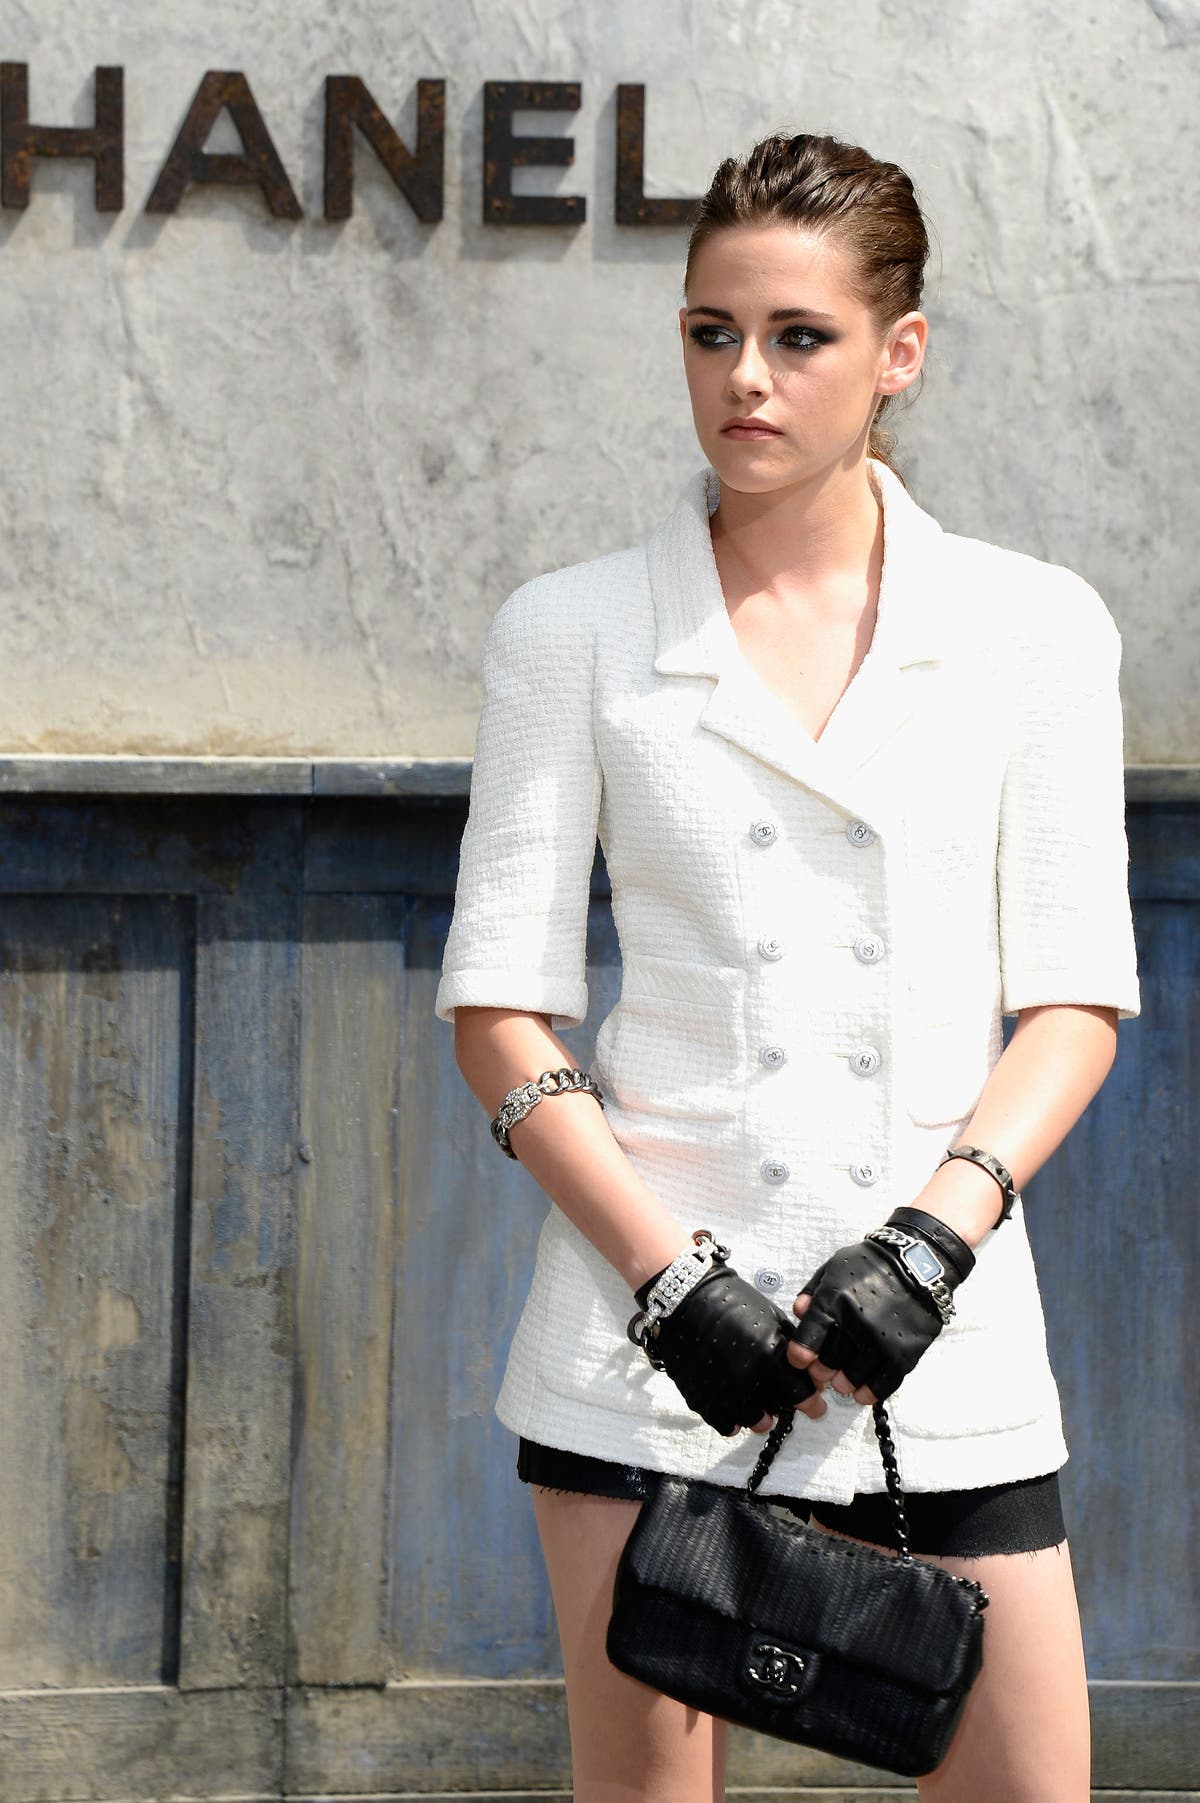 Karl is going to kill me!' Kristen Stewart's stylist on ripping up